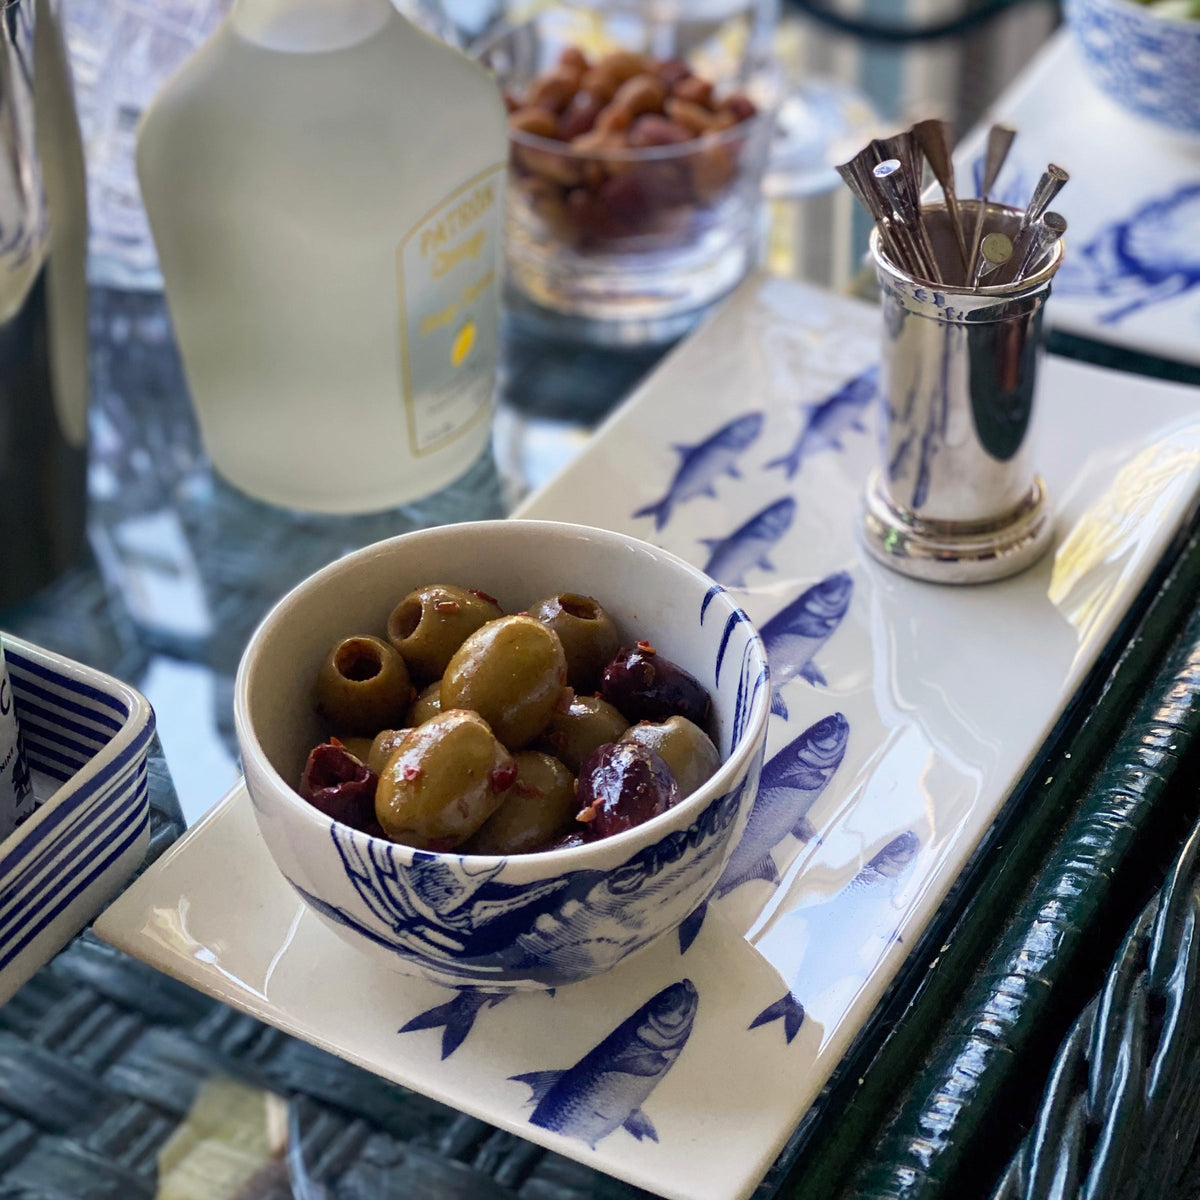 A Blue Crab Snack Bowl from Caskata holds seasoned olives on a nautically inspired bar cart.